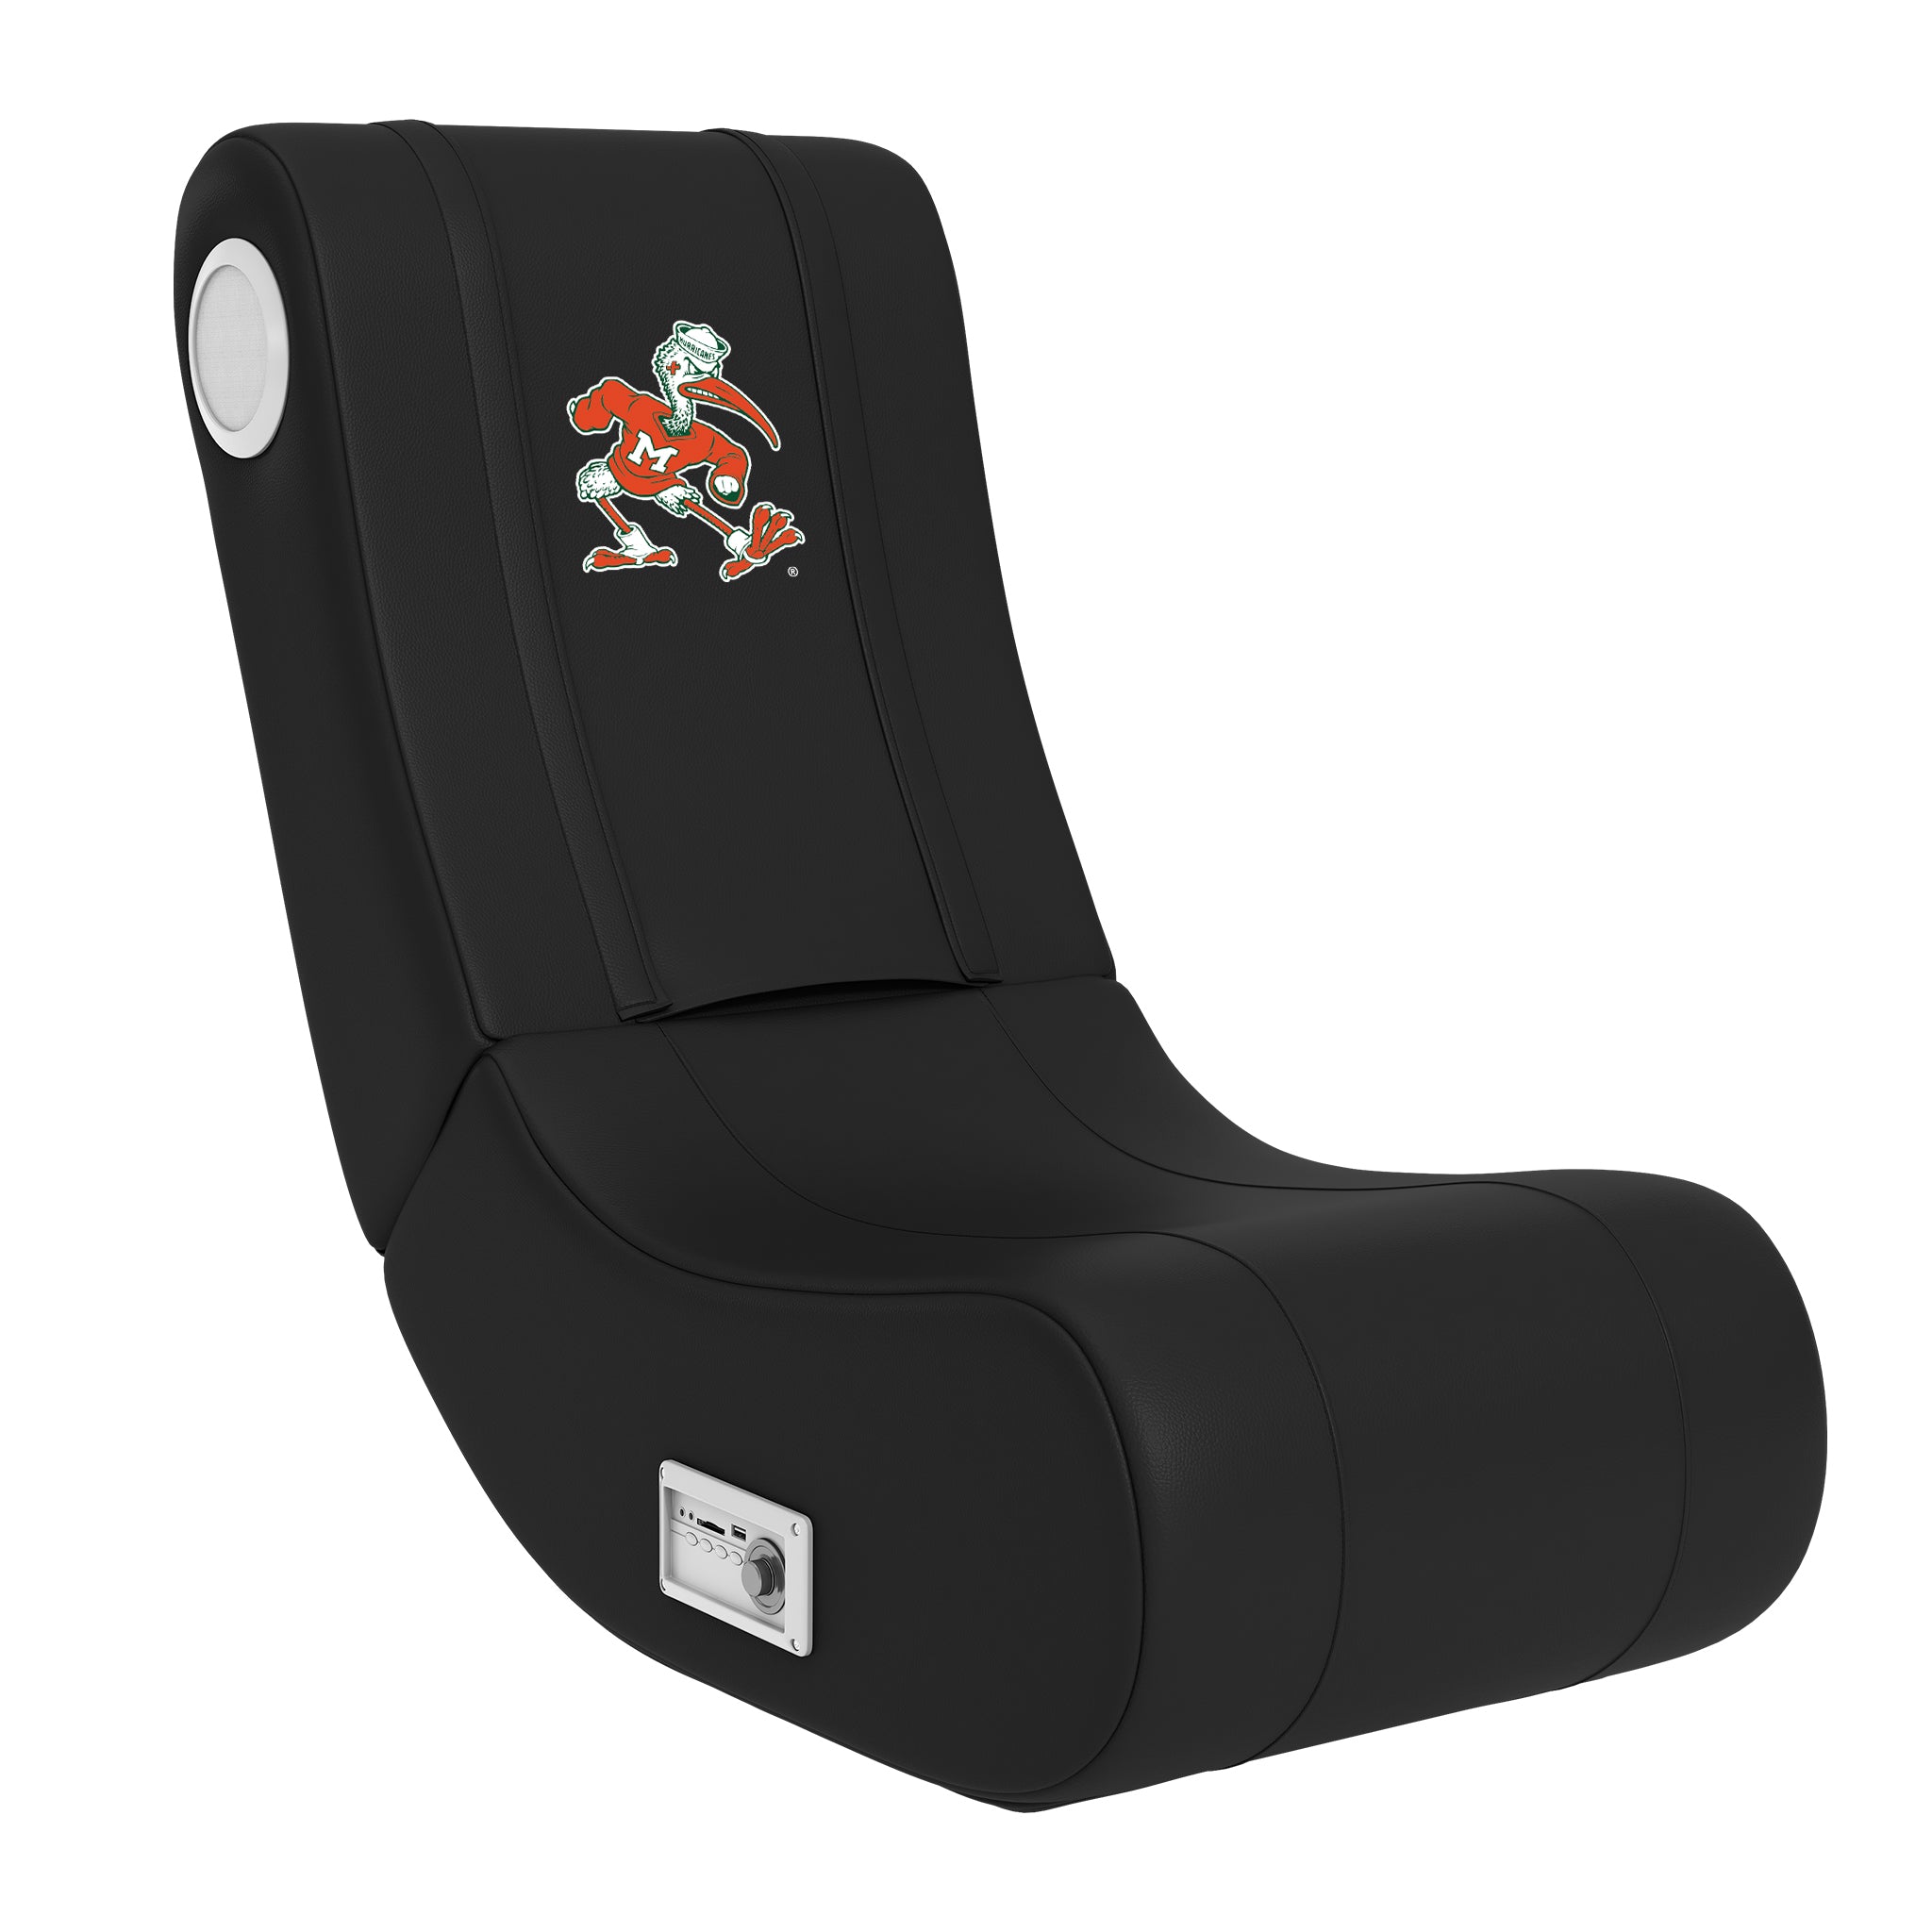 University of Miami Hurricanes with Game Rocker 100 with University of Miami Hurricanes Logo Panel with Secondary logo